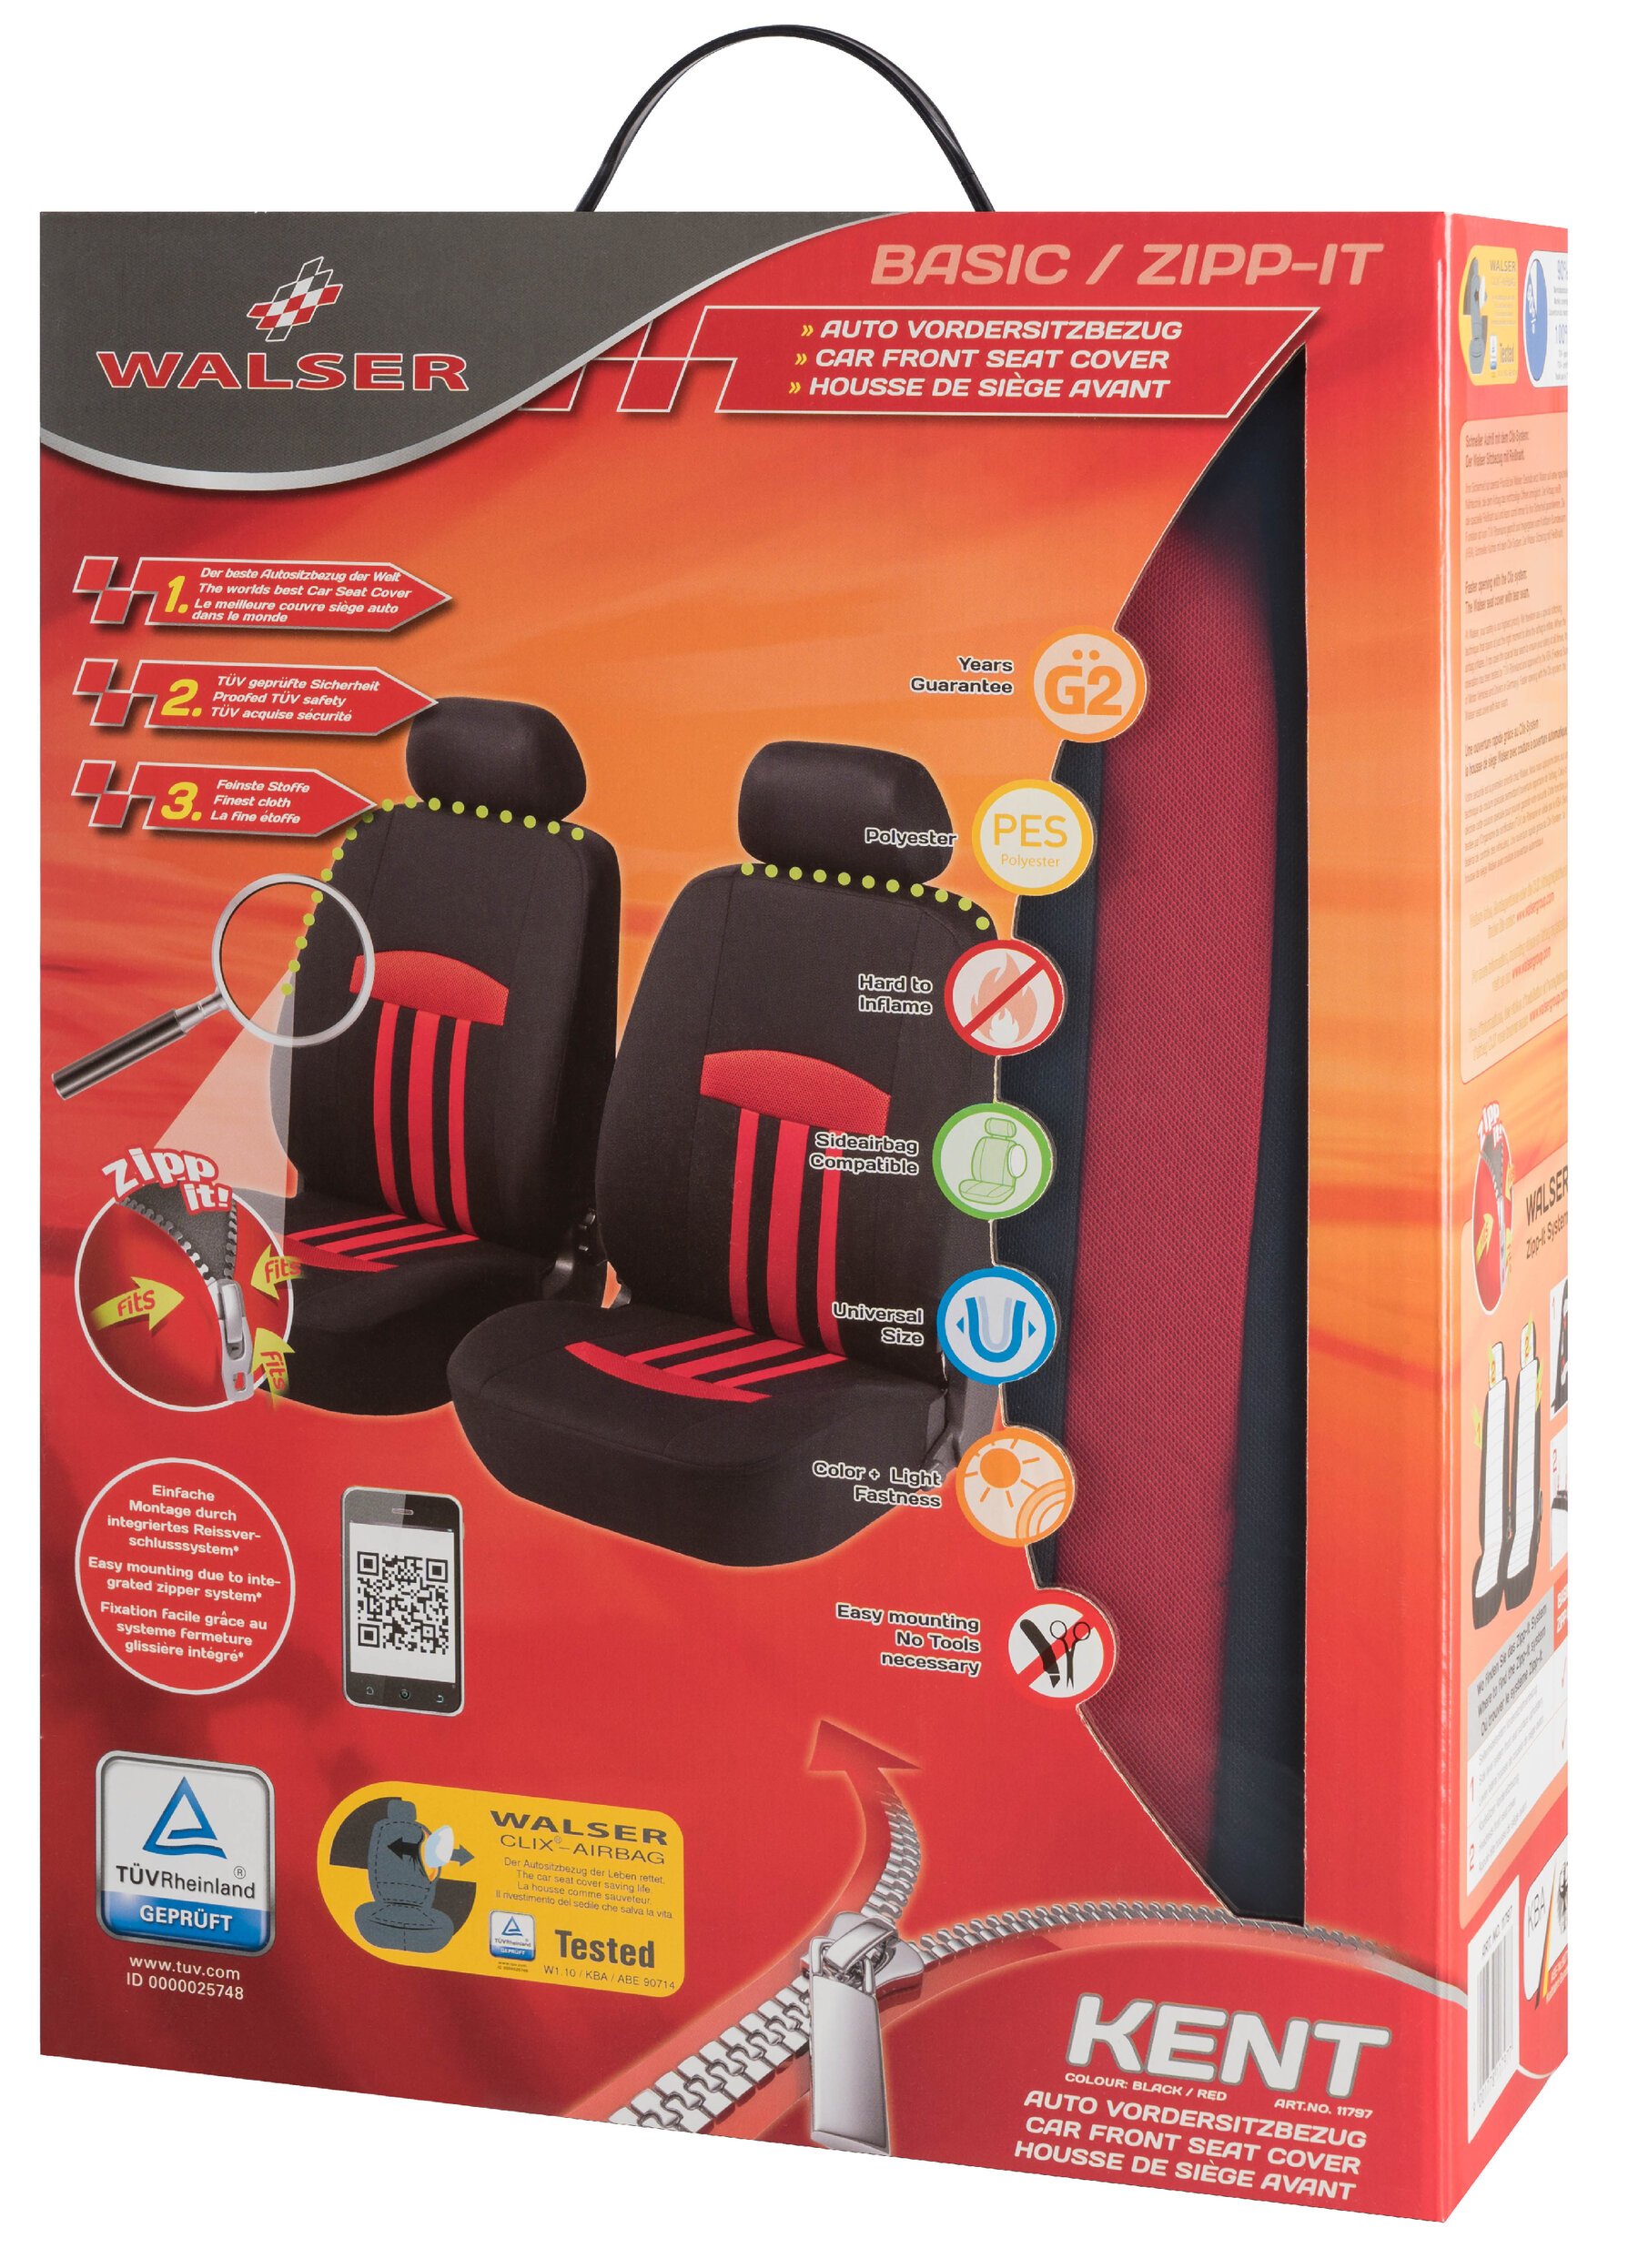 ZIPP-IT Basic Kent red Car Seat covers for two front seats with zipper system